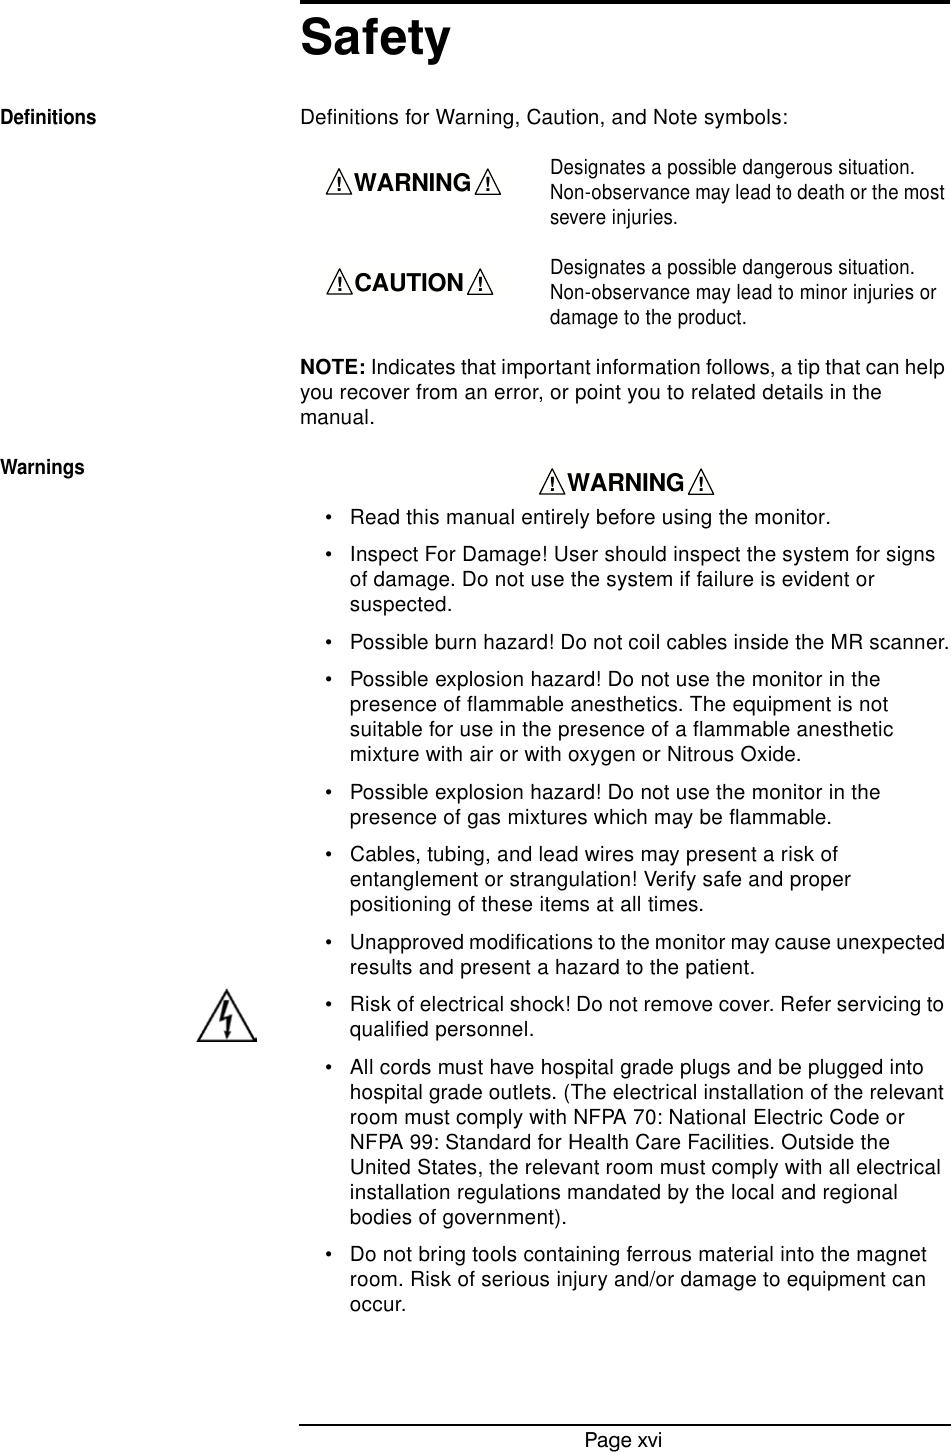 Page xviSafetyDefinitionsDefinitions for Warning, Caution, and Note symbols:Designates a possible dangerous situation. Non-observance may lead to death or the most severe injuries.Designates a possible dangerous situation. Non-observance may lead to minor injuries or damage to the product.NOTE: Indicates that important information follows, a tip that can help you recover from an error, or point you to related details in the manual.Warnings• Read this manual entirely before using the monitor.• Inspect For Damage! User should inspect the system for signs of damage. Do not use the system if failure is evident or suspected.• Possible burn hazard! Do not coil cables inside the MR scanner.• Possible explosion hazard! Do not use the monitor in the presence of flammable anesthetics. The equipment is not suitable for use in the presence of a flammable anesthetic mixture with air or with oxygen or Nitrous Oxide.• Possible explosion hazard! Do not use the monitor in the presence of gas mixtures which may be flammable.• Cables, tubing, and lead wires may present a risk of entanglement or strangulation! Verify safe and proper positioning of these items at all times.• Unapproved modifications to the monitor may cause unexpected results and present a hazard to the patient.• Risk of electrical shock! Do not remove cover. Refer servicing to qualified personnel.• All cords must have hospital grade plugs and be plugged into hospital grade outlets. (The electrical installation of the relevant room must comply with NFPA 70: National Electric Code or NFPA 99: Standard for Health Care Facilities. Outside the United States, the relevant room must comply with all electrical installation regulations mandated by the local and regional bodies of government).• Do not bring tools containing ferrous material into the magnet room. Risk of serious injury and/or damage to equipment can occur.    WARNING    !!    CAUTION    !!    WARNING    !!